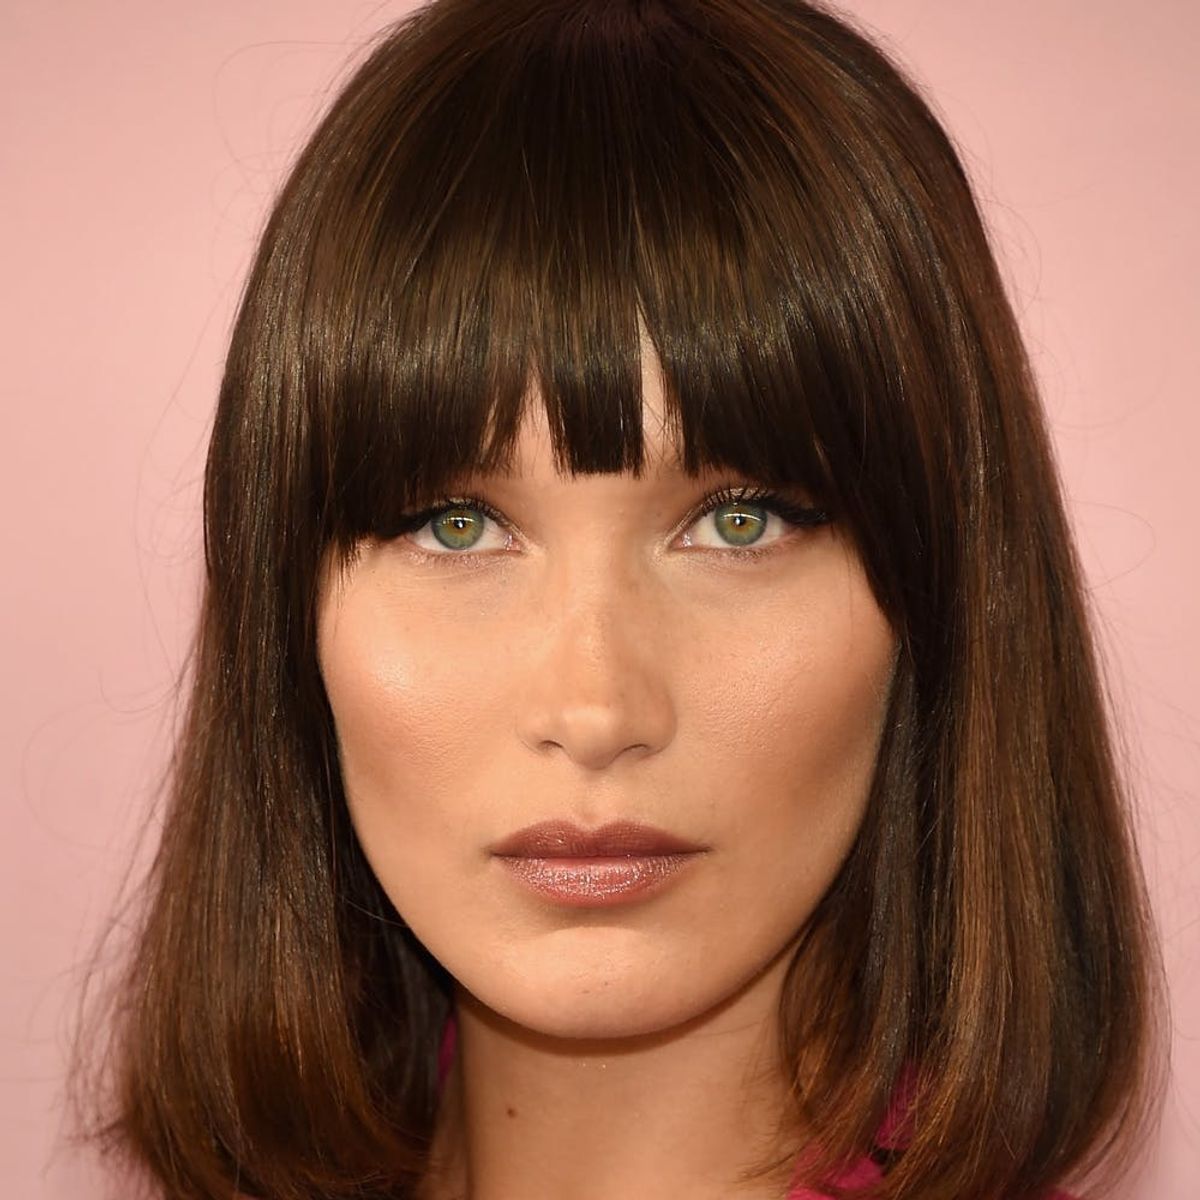 The Real Reason Bella Hadid Doesn’t Smile in Photos Is Not What You Might Expect